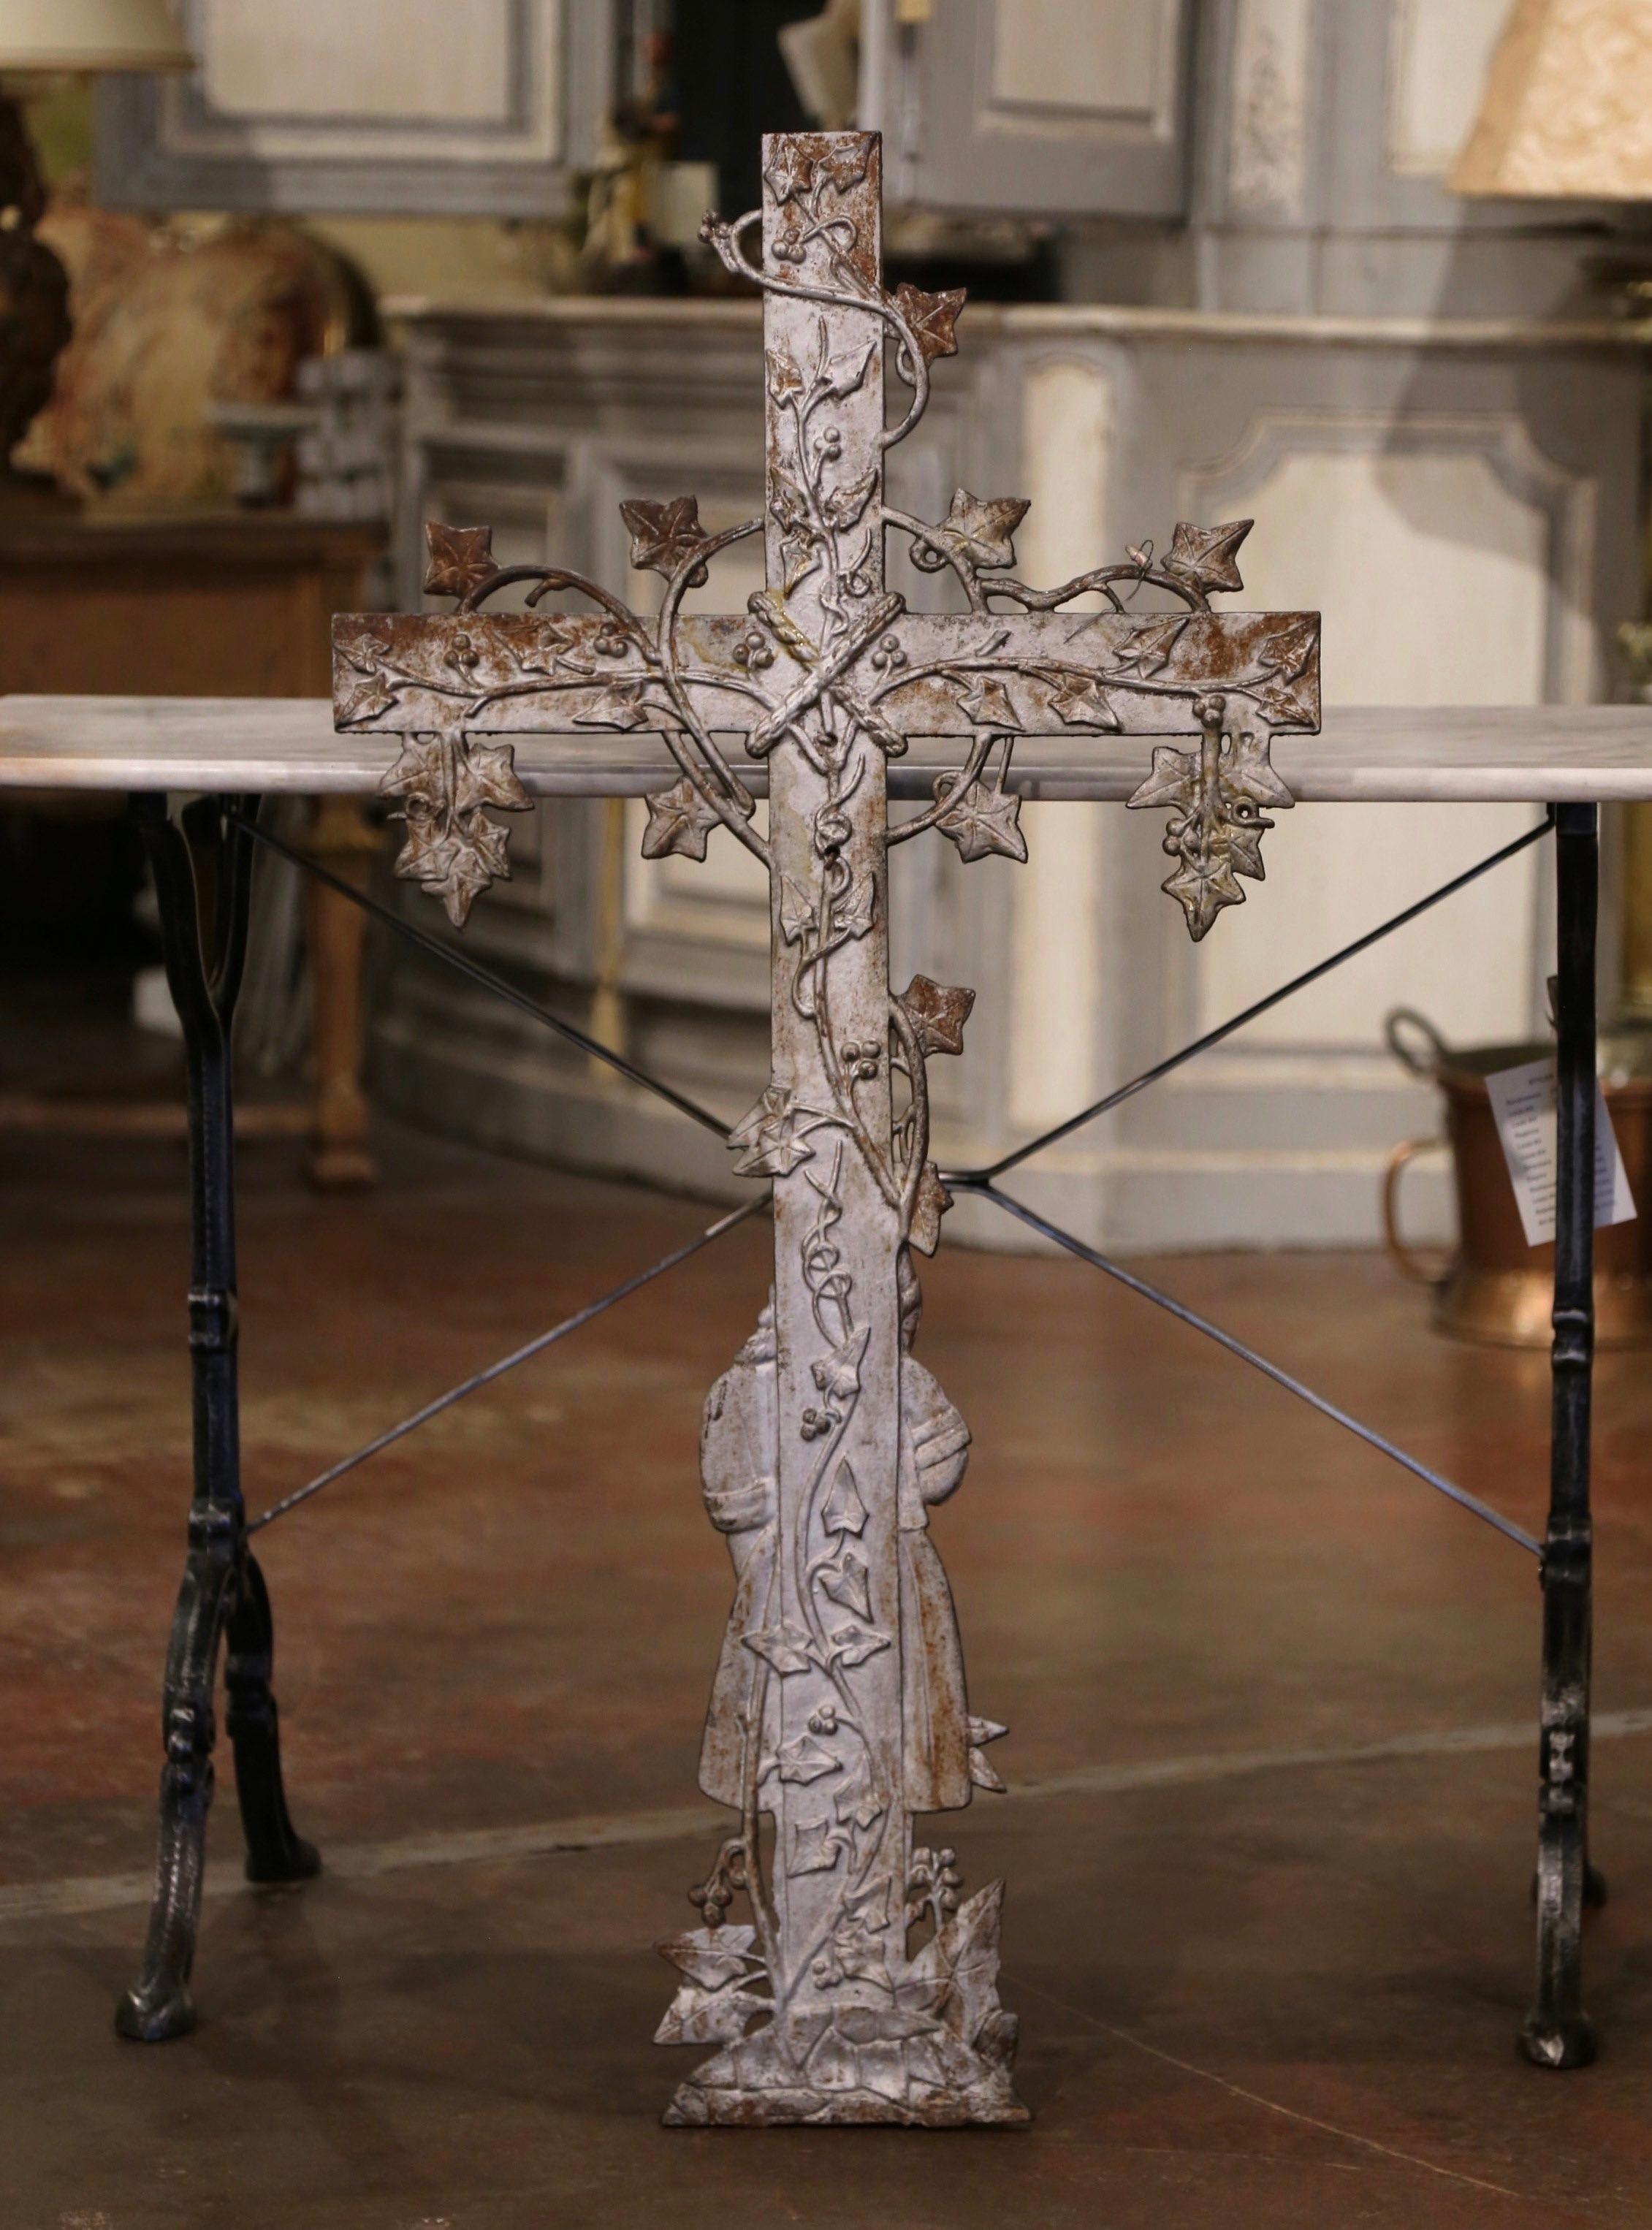 19th Century French Iron Garden Crucifix Cross with Mourner and Vine Motifs 3